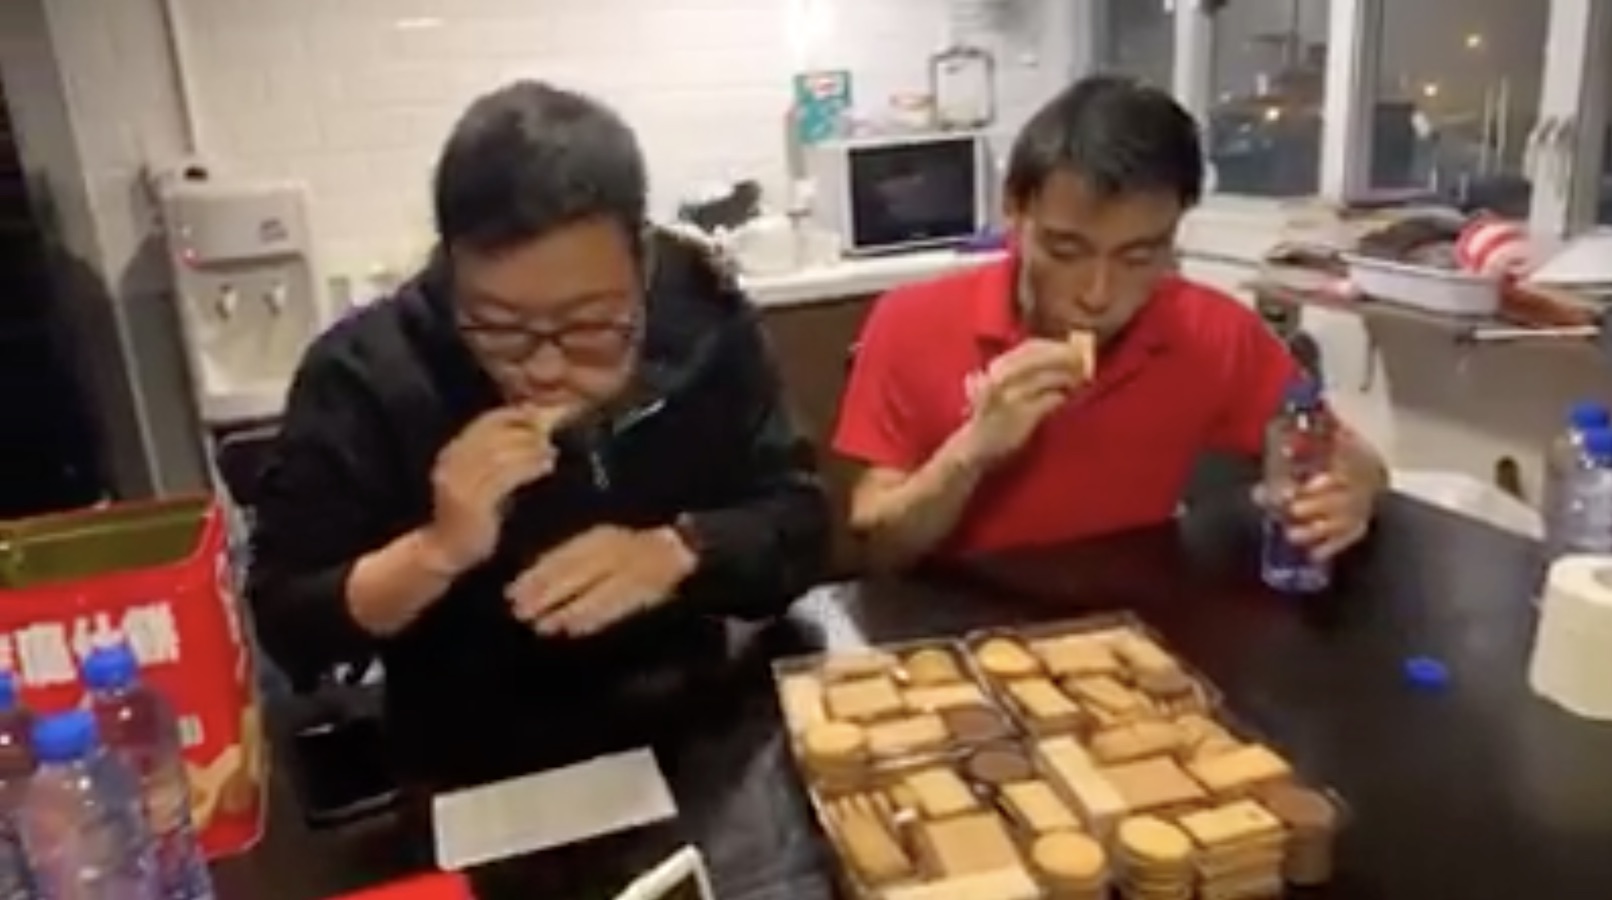 Thousands tune in to watch two men eat an entire tin of Garden Bakery cookies. Screengrab via Facebook video/100most.